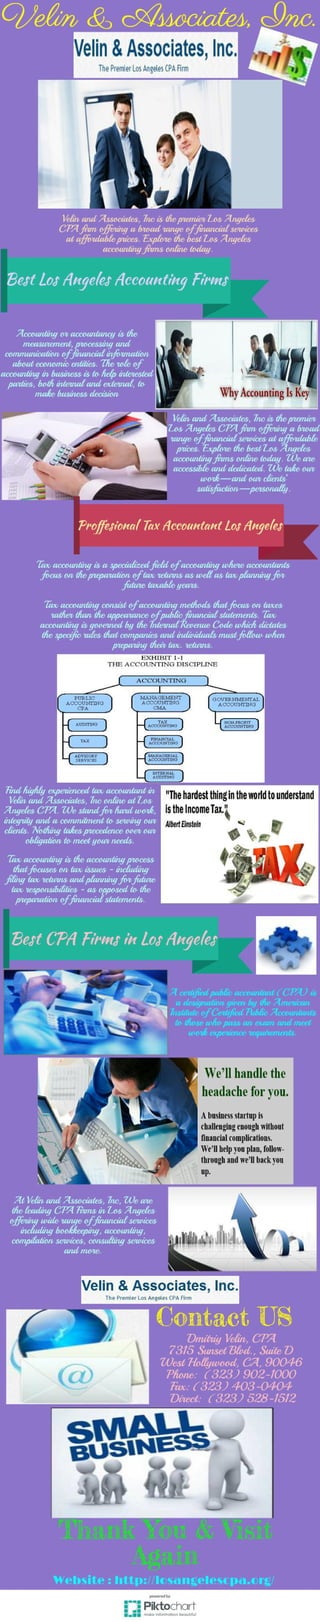 Best cpa firms in los angeles